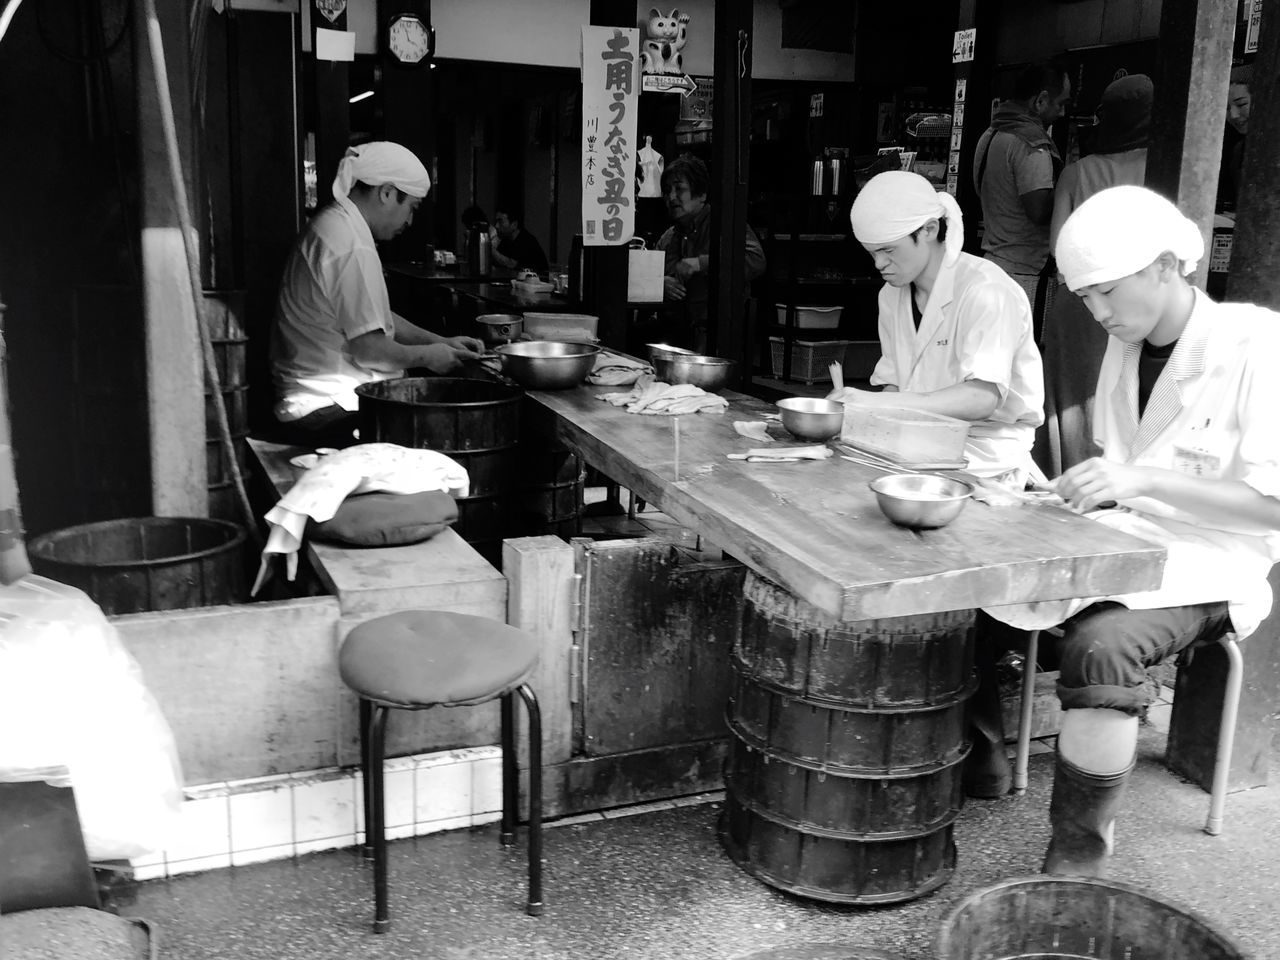 PEOPLE WORKING AT RESTAURANT